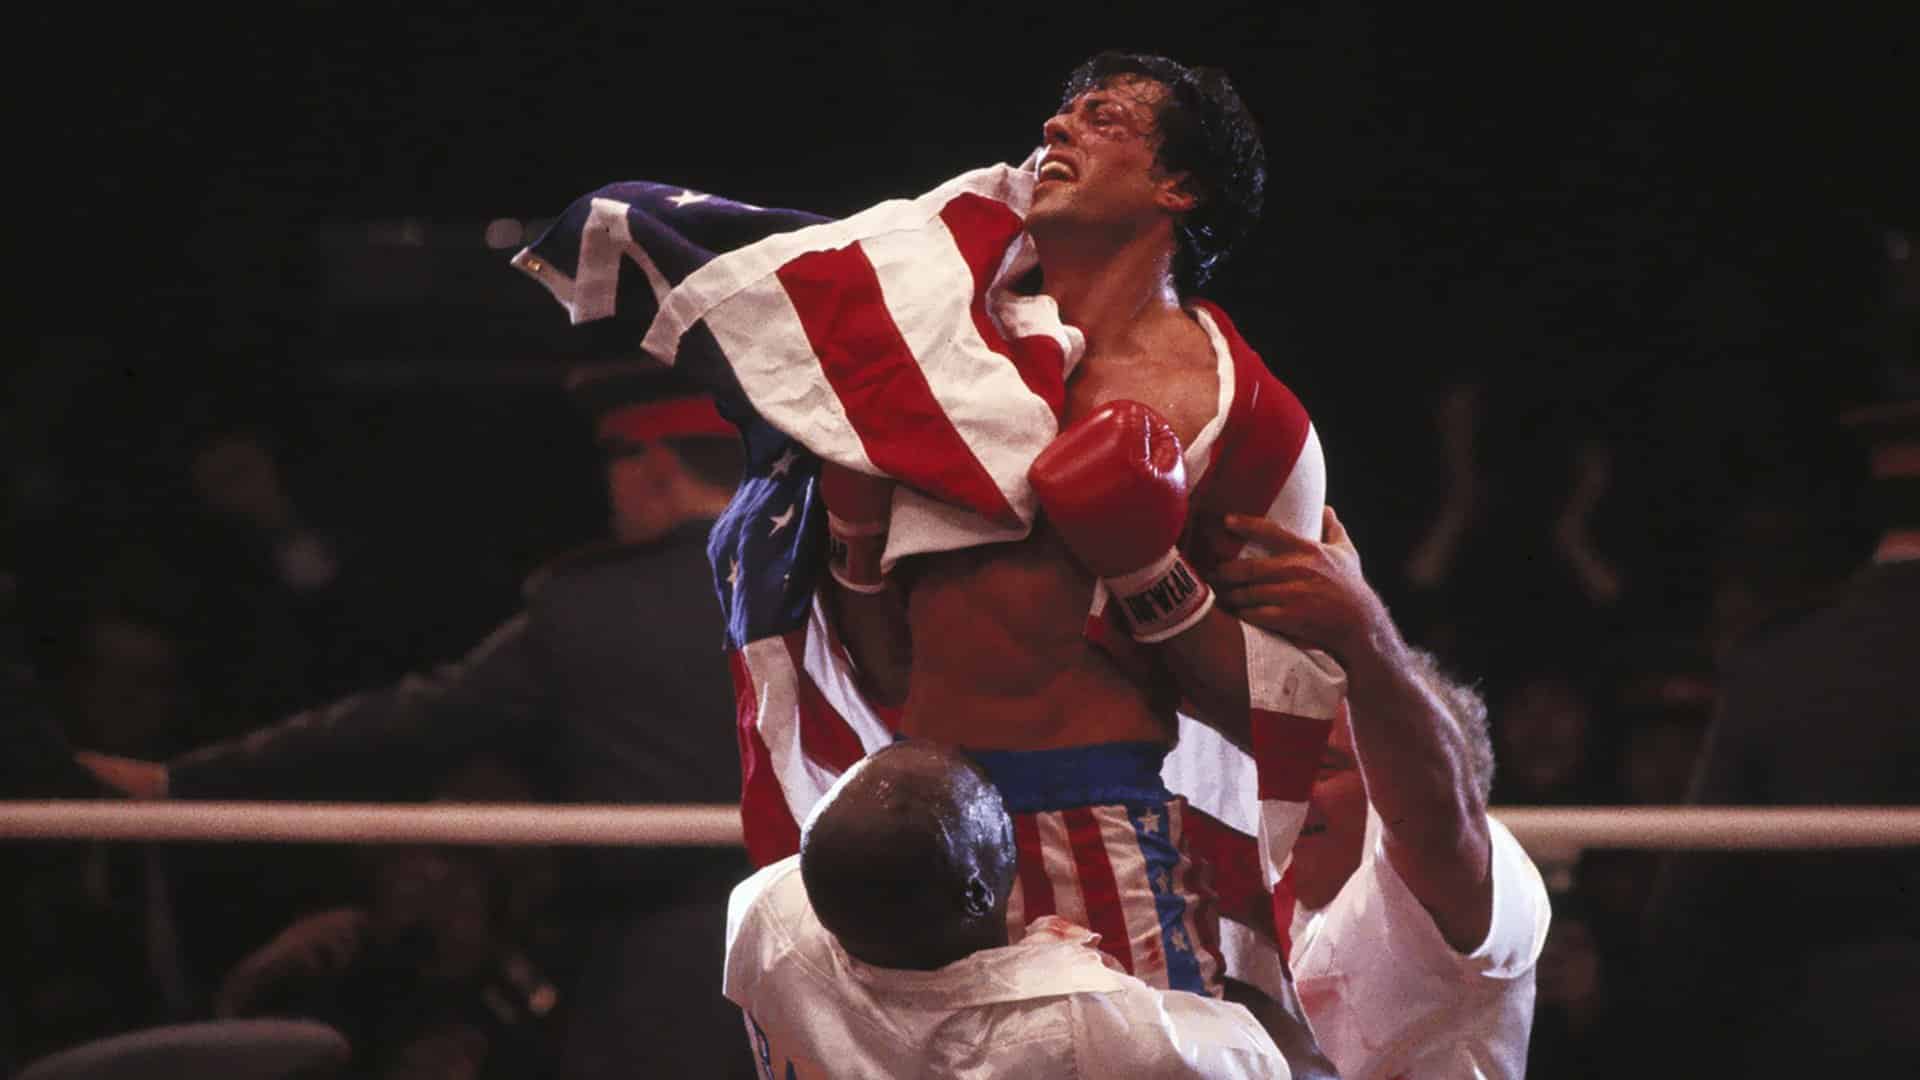 18 Quotes From The Rocky Movie Most Of Us Can’t Get Over For Days